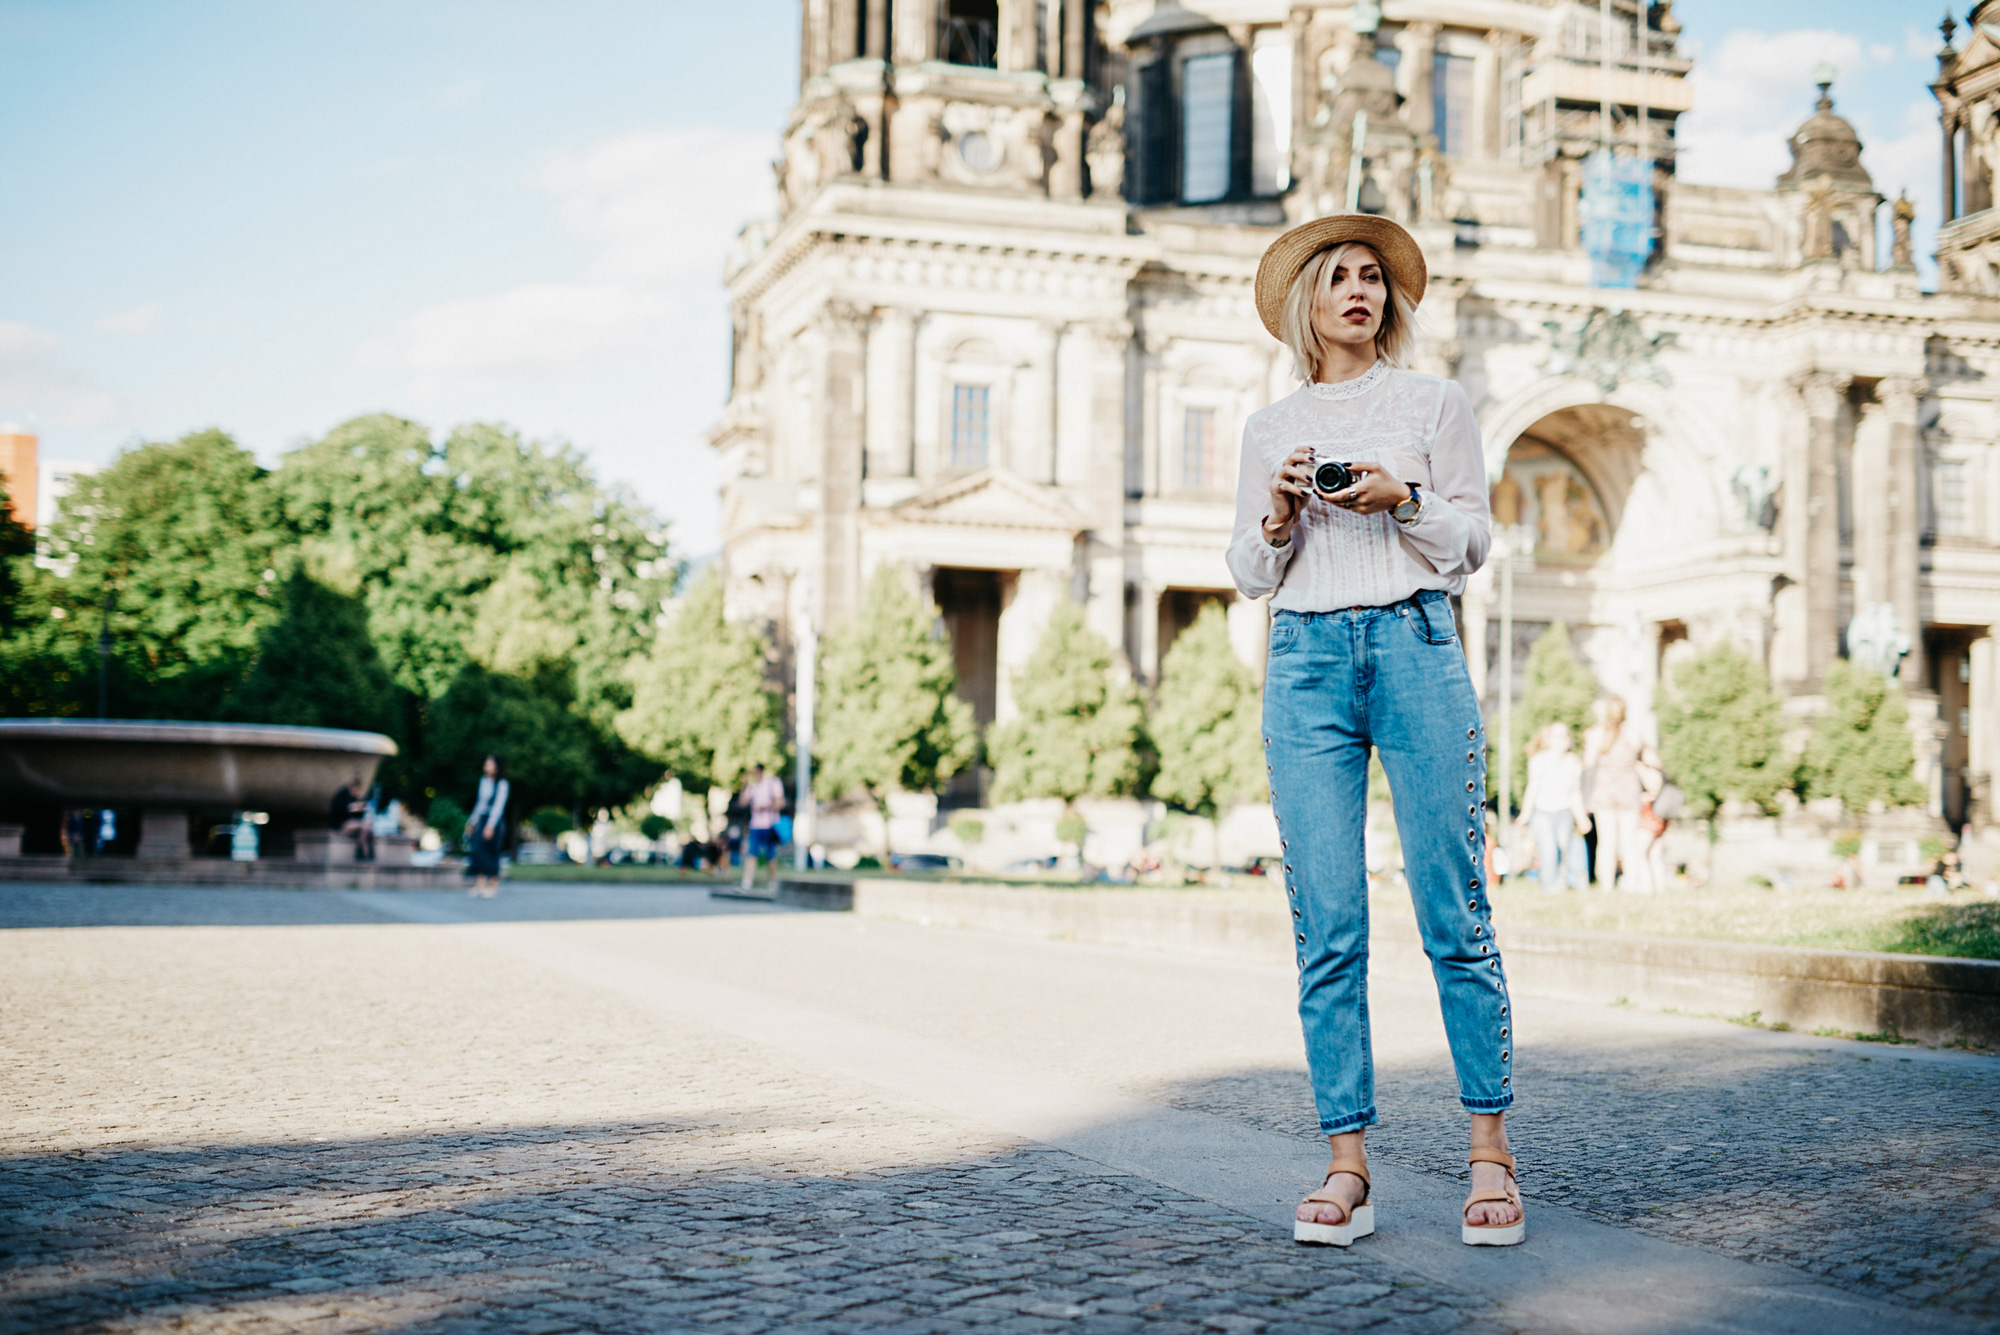 Berliner Dom | how to combine a mom jeans and Teva sandals | summer travel style